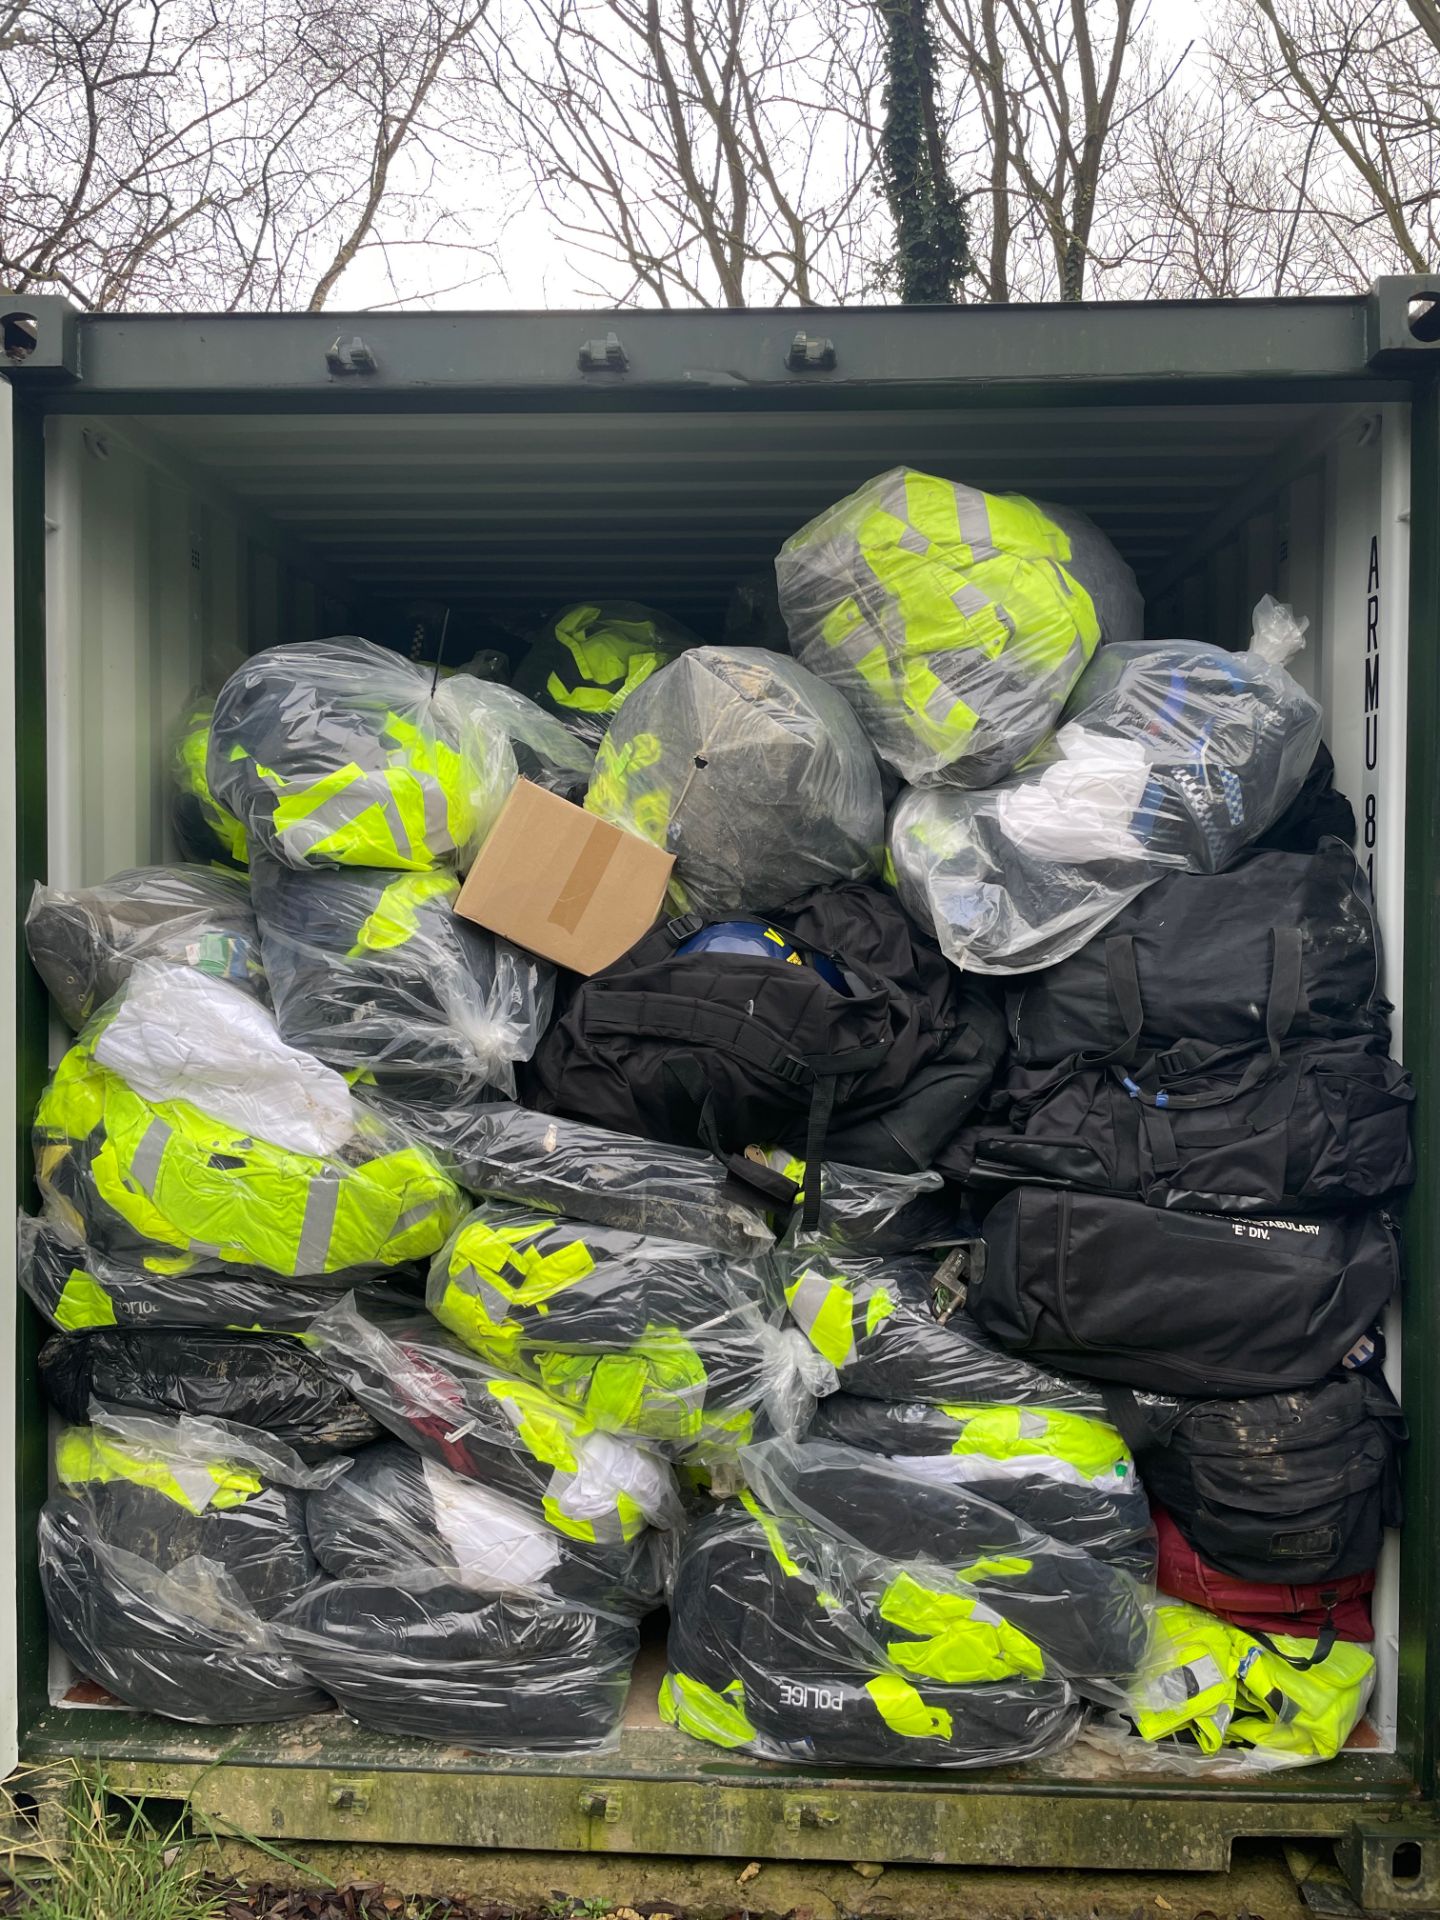 FULL CONTAINER LOAD OF POLICE CLOTHING APPROX 500 BAGS FULL - RRP £137,500 - NO VAT ON HAMMER